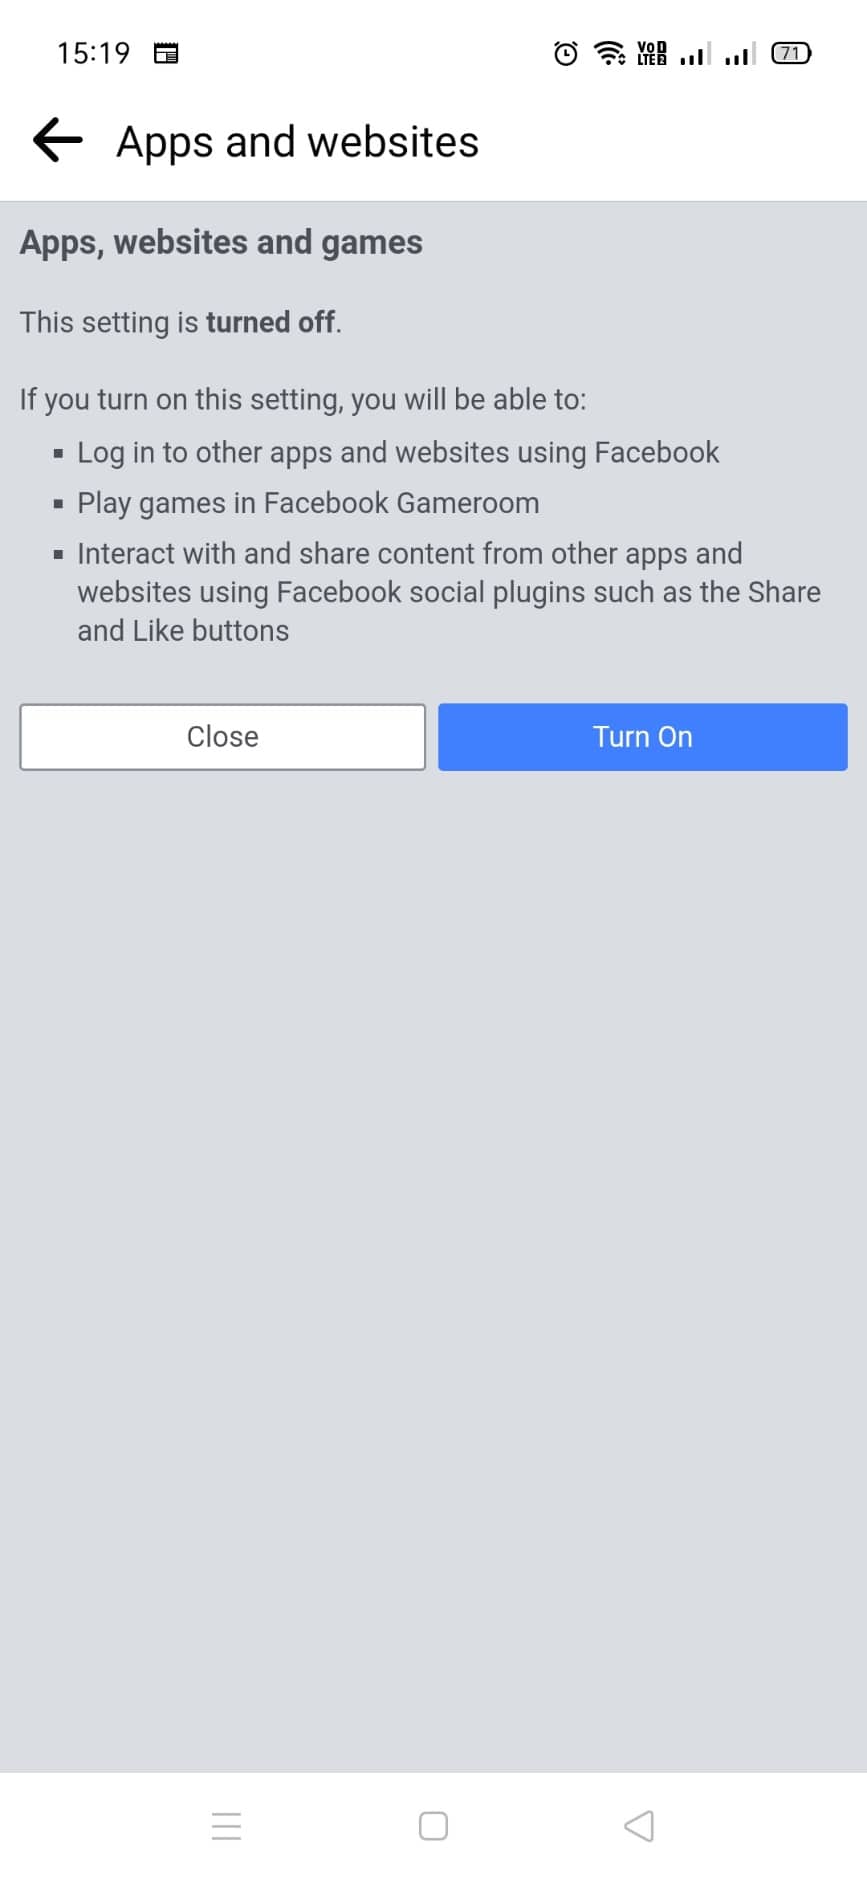 Finally, to interact and share content with other applications, Turn On the setting | How to Link Facebook to Twitter